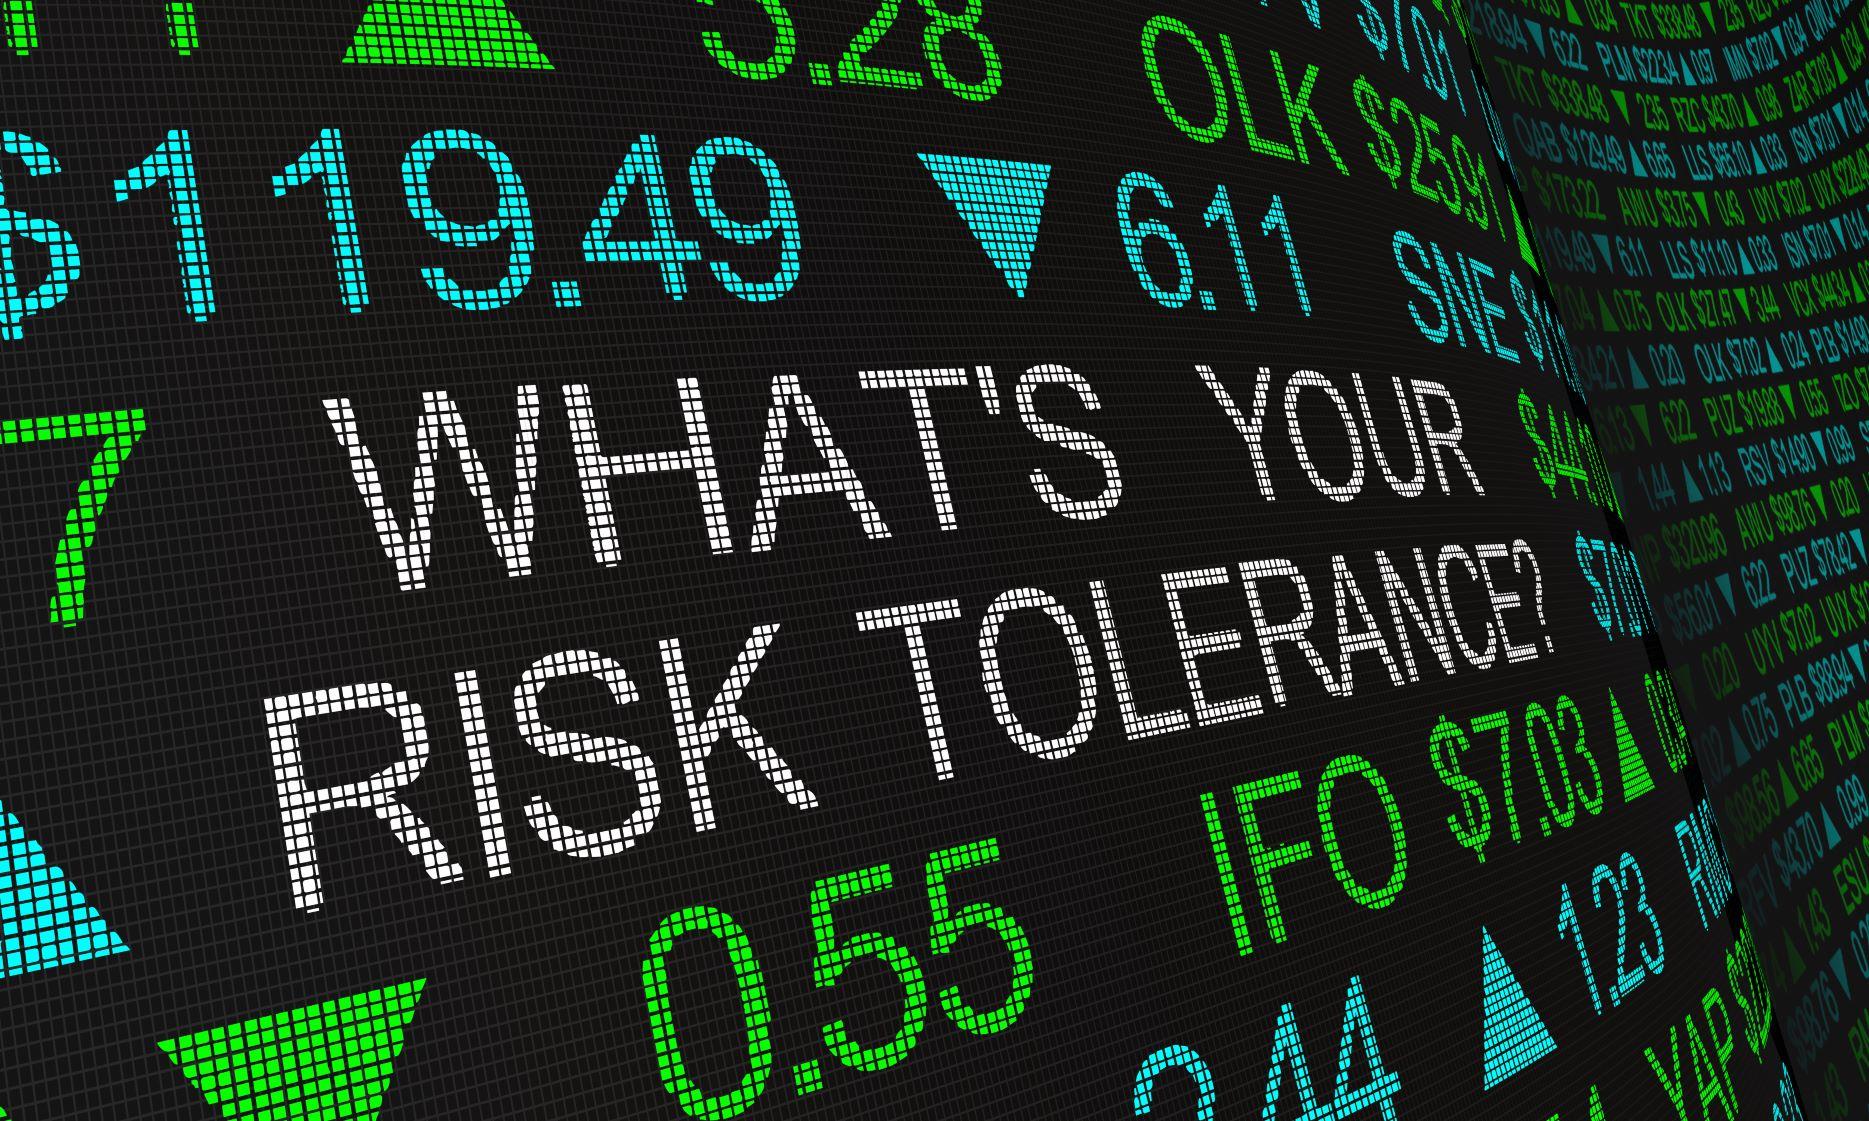 what is your risk tolerance